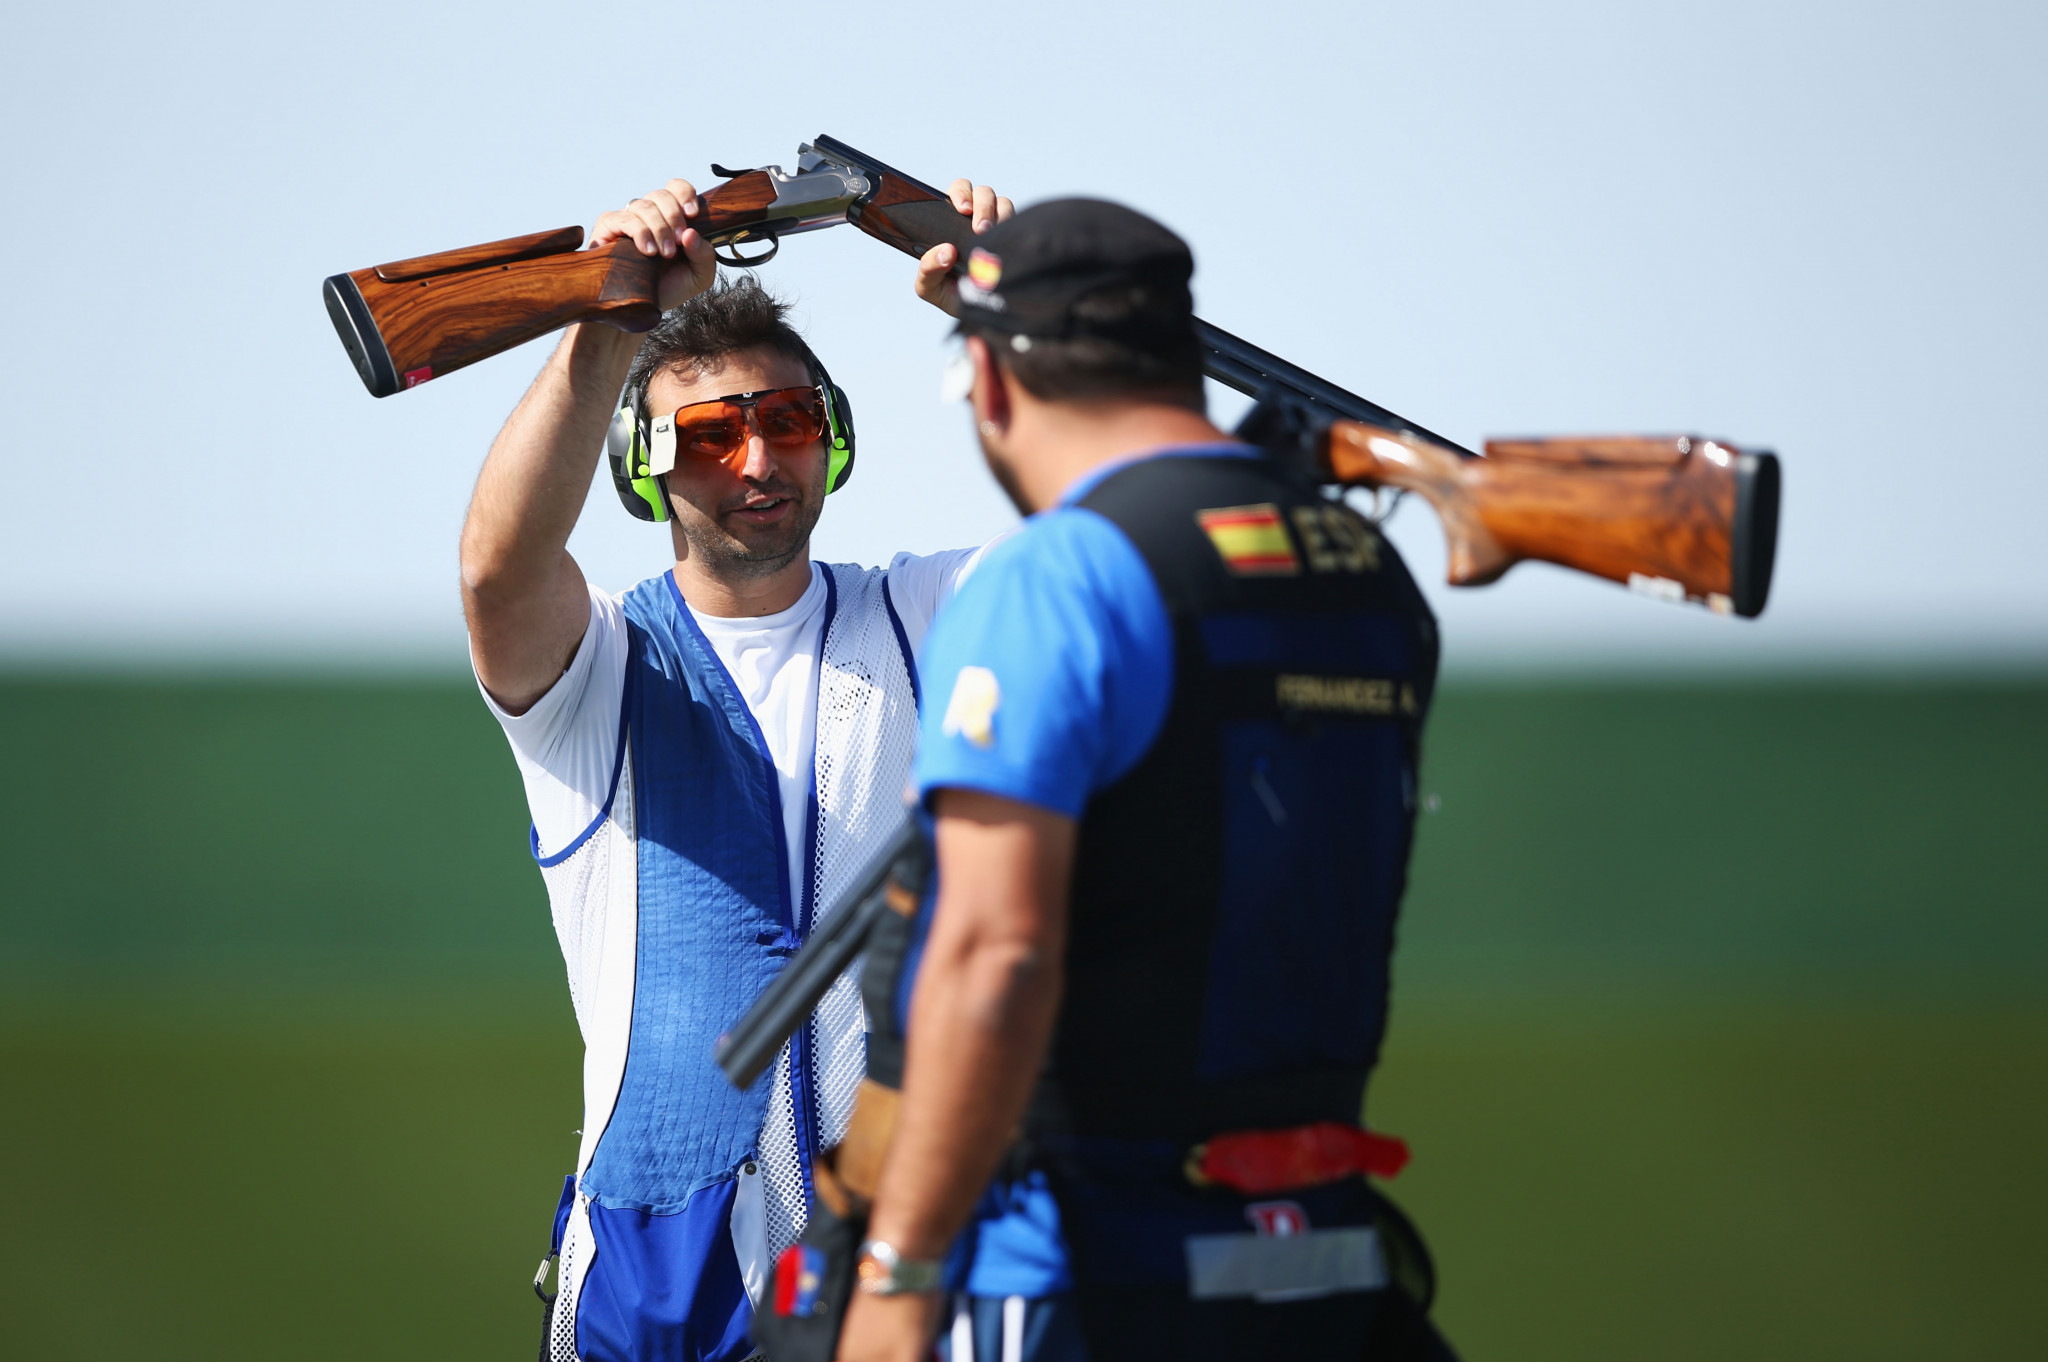 Spain and Russia impress in trap qualifiers at ISSF World Cup in Cairo